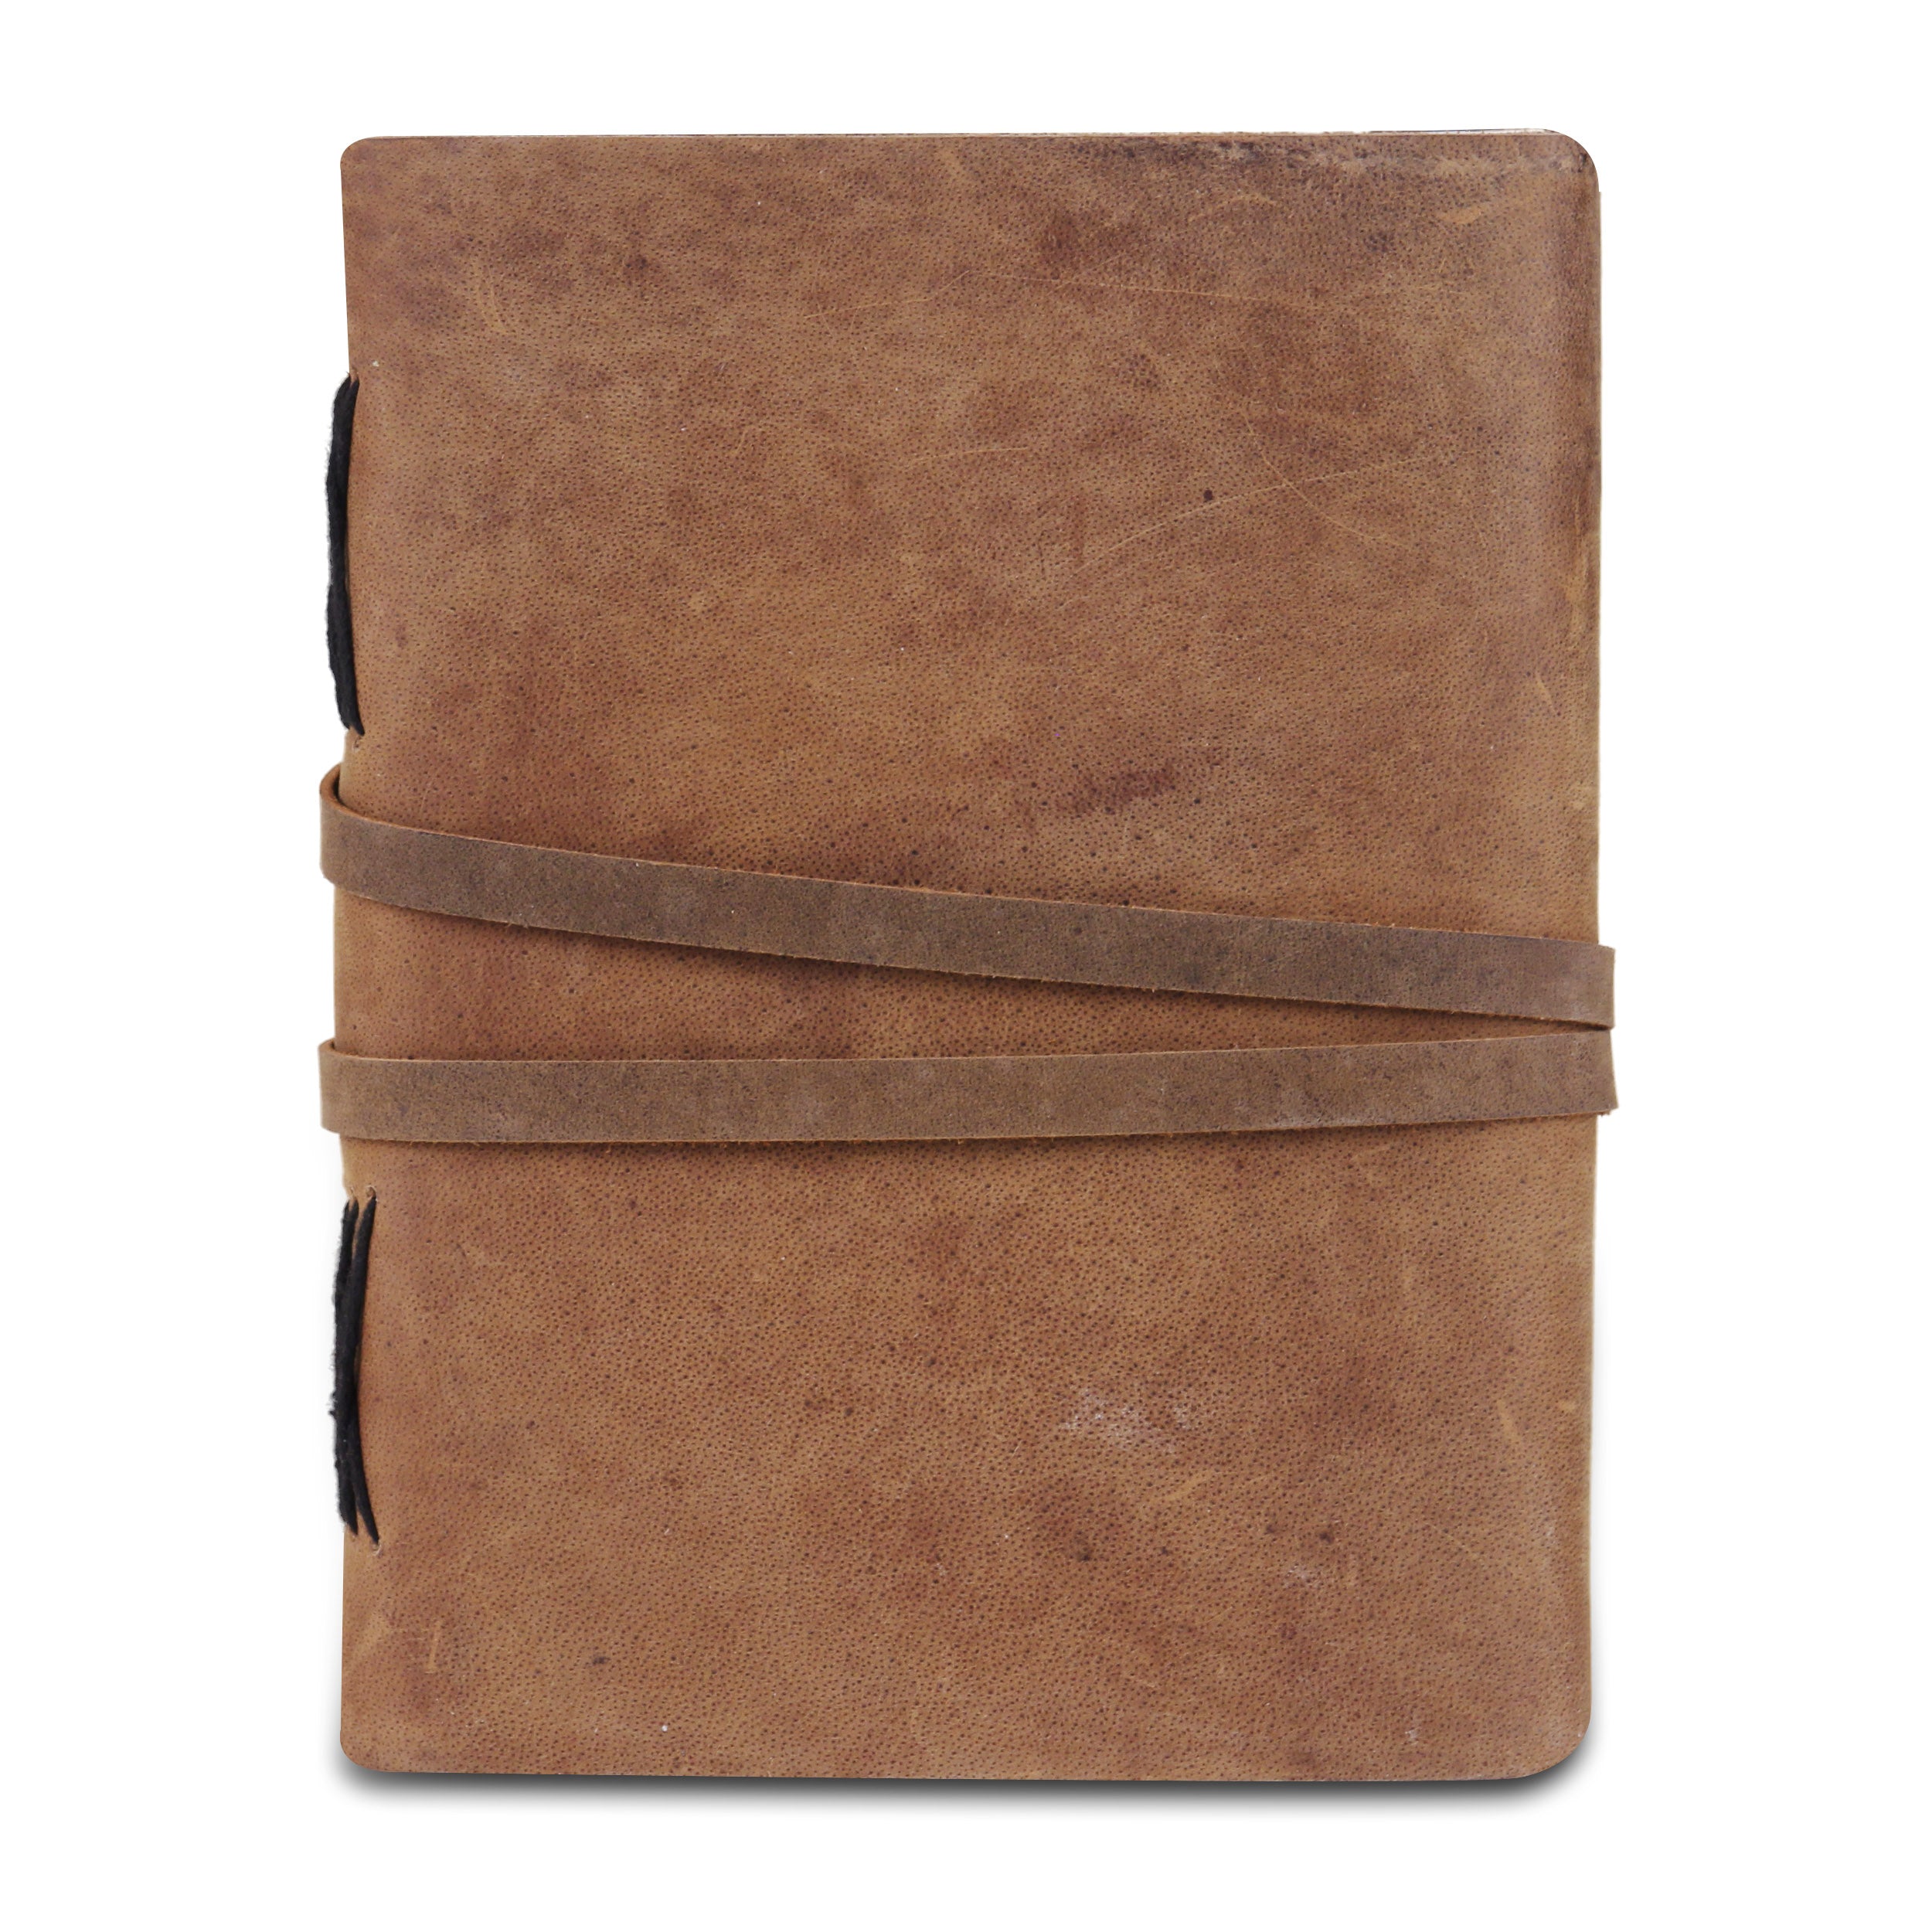 Light Brown Plain Textured Leather Notebook Journal with Strap